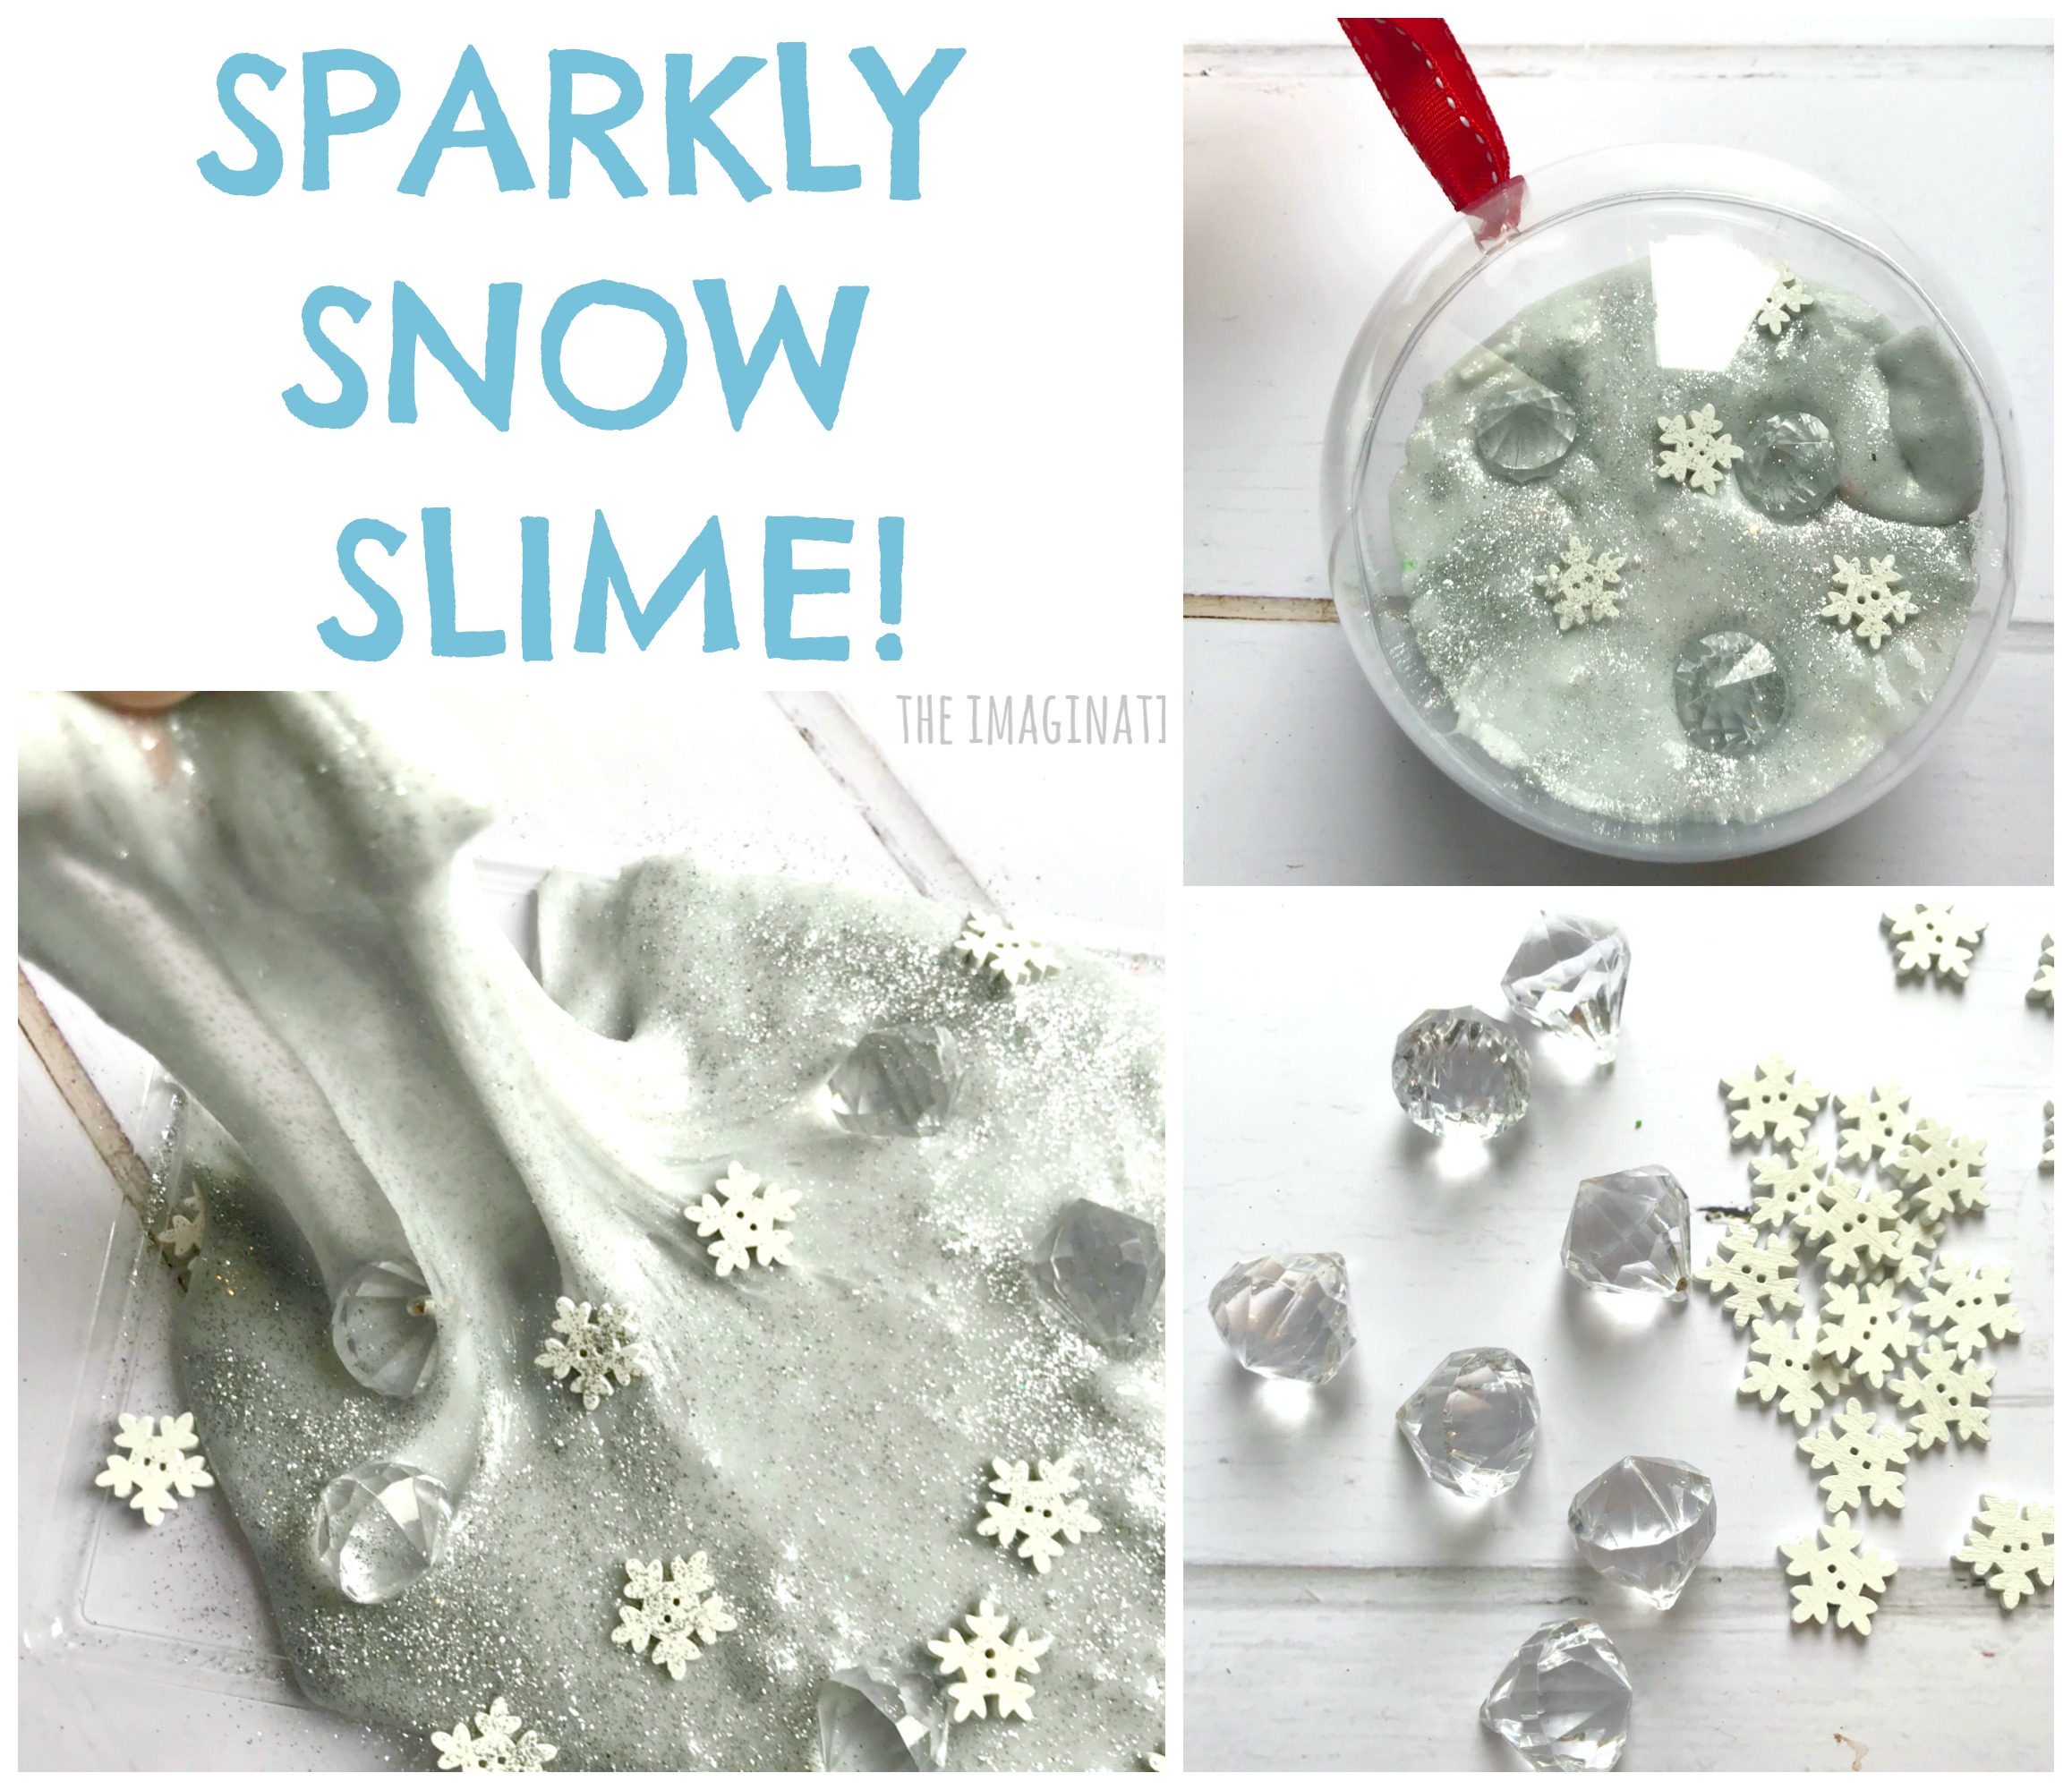 Sparkly Snow Slime Bauble Gift!